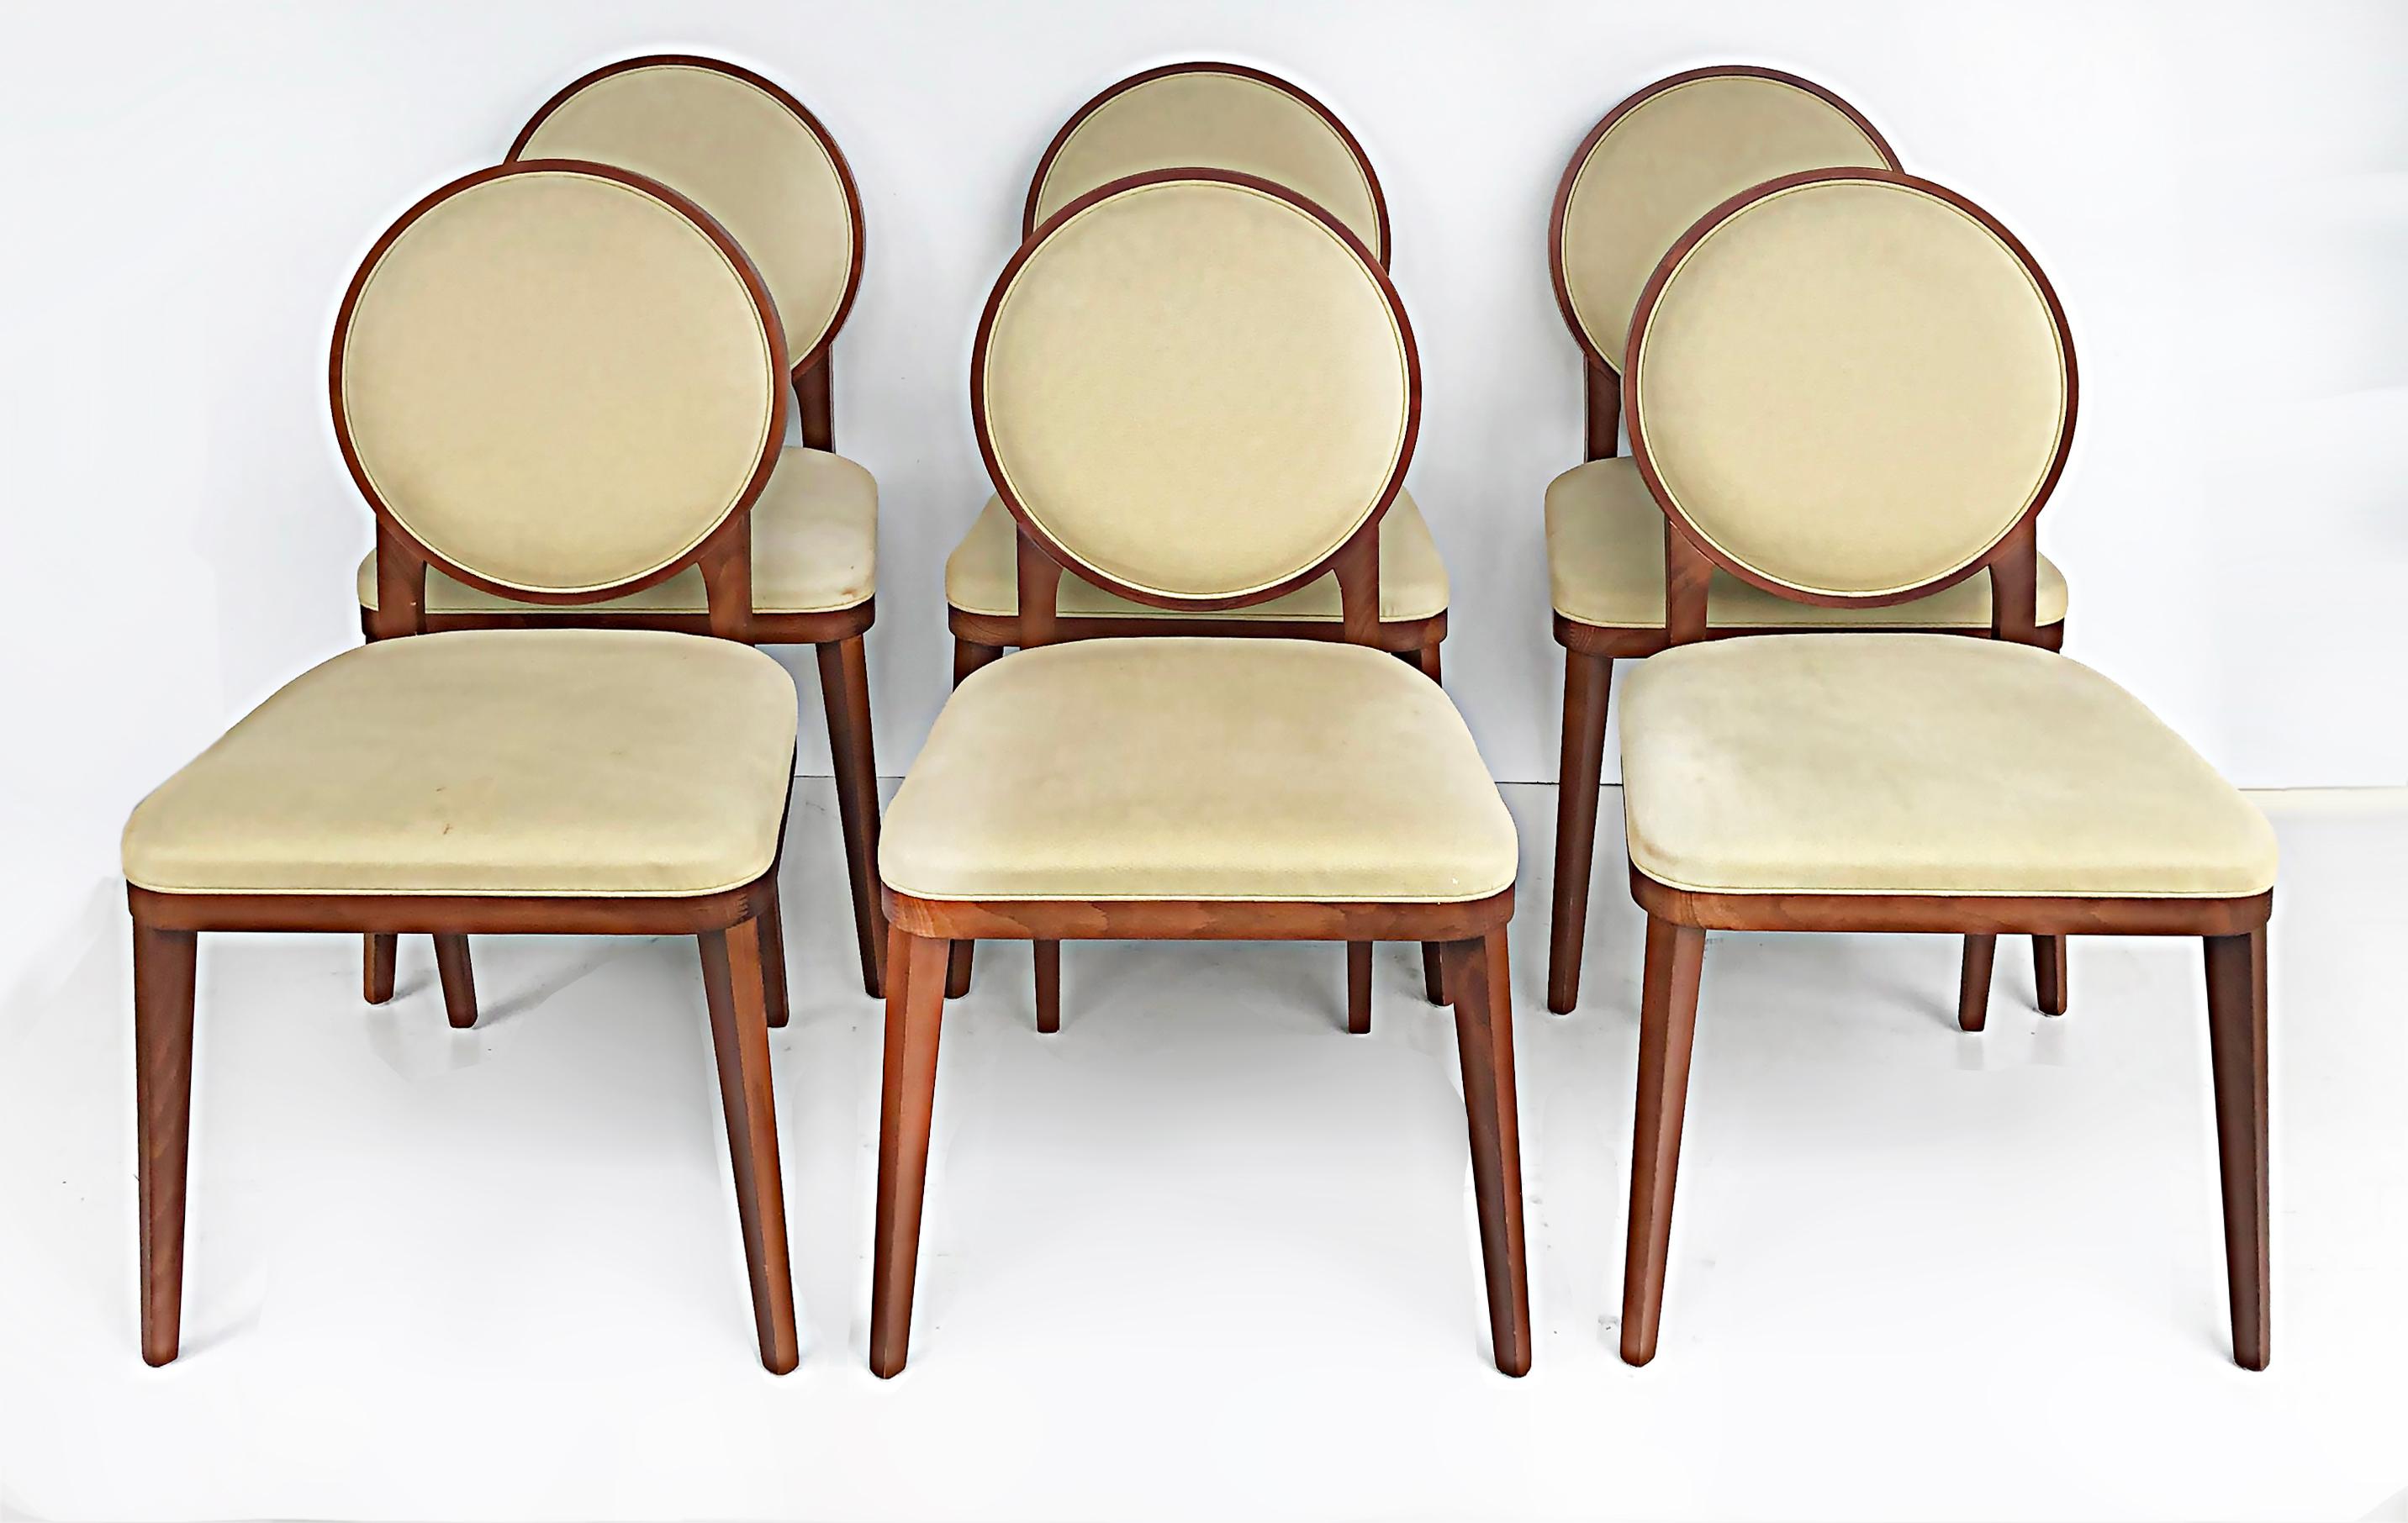 Bross Studio Riforma Italy Art Deco Style Beech Wood Chairs, Set of 6

Offered for sale is a set of 6 Art Deco style 